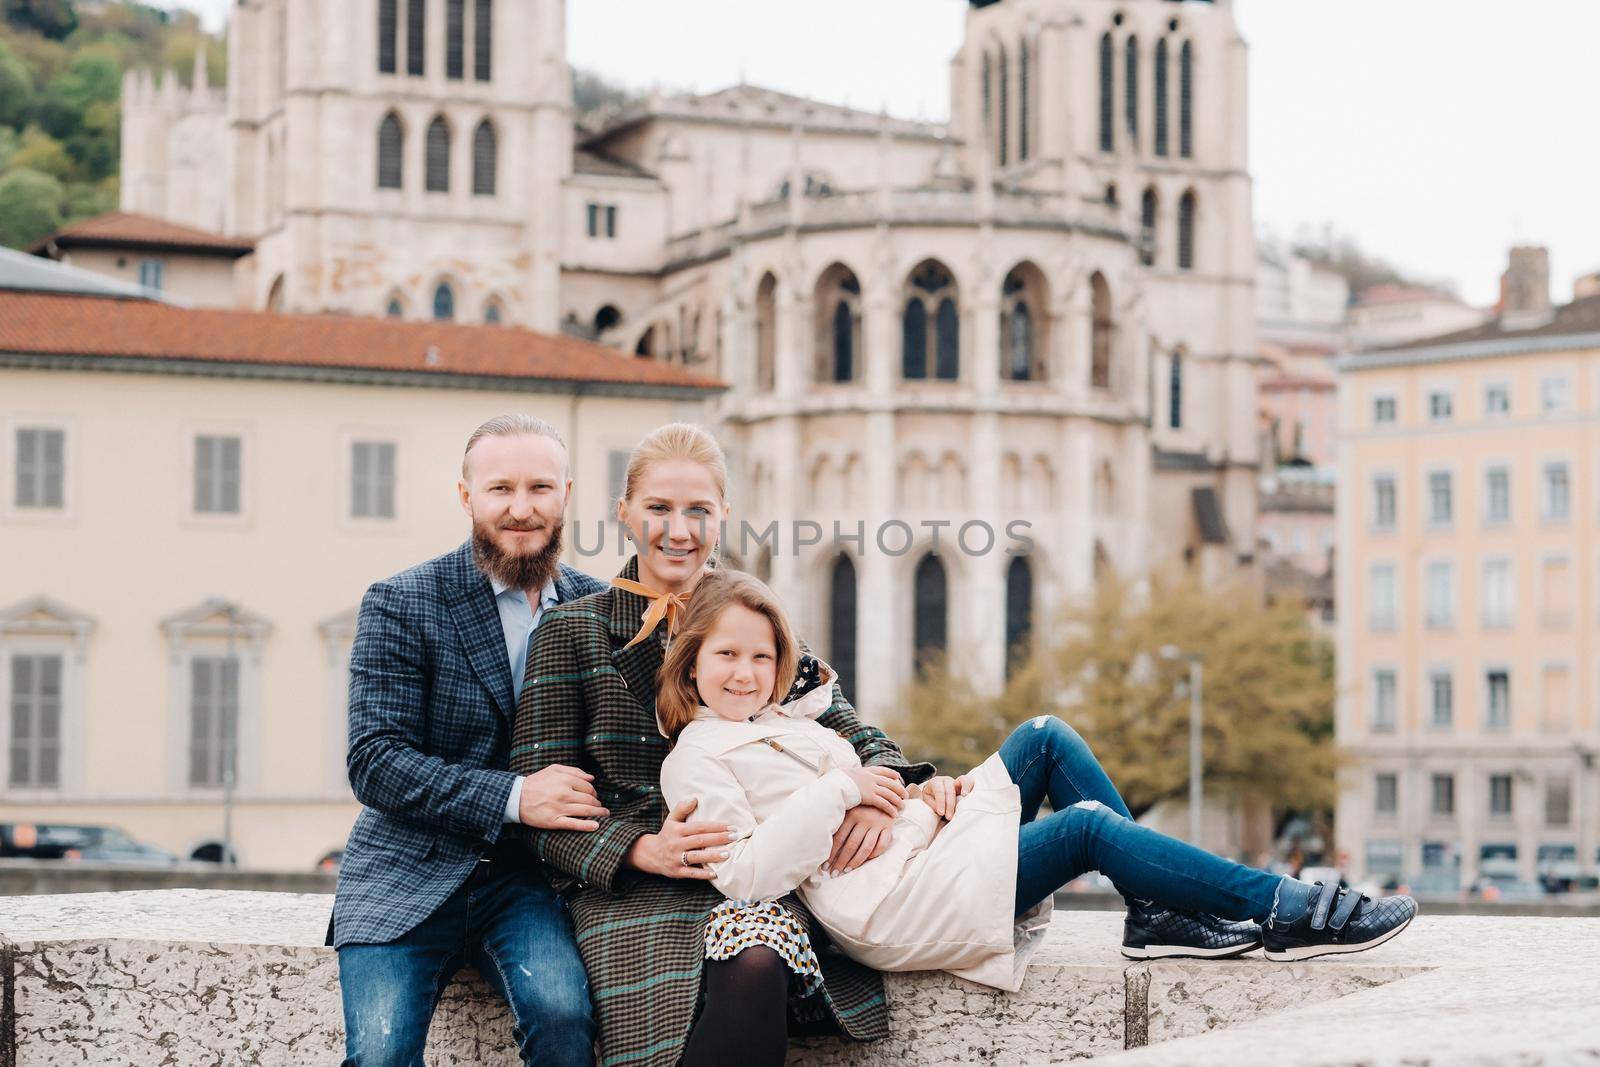 A beautiful family with strolls through the old city of Lyon in France.Family trip to the old cities of France by Lobachad